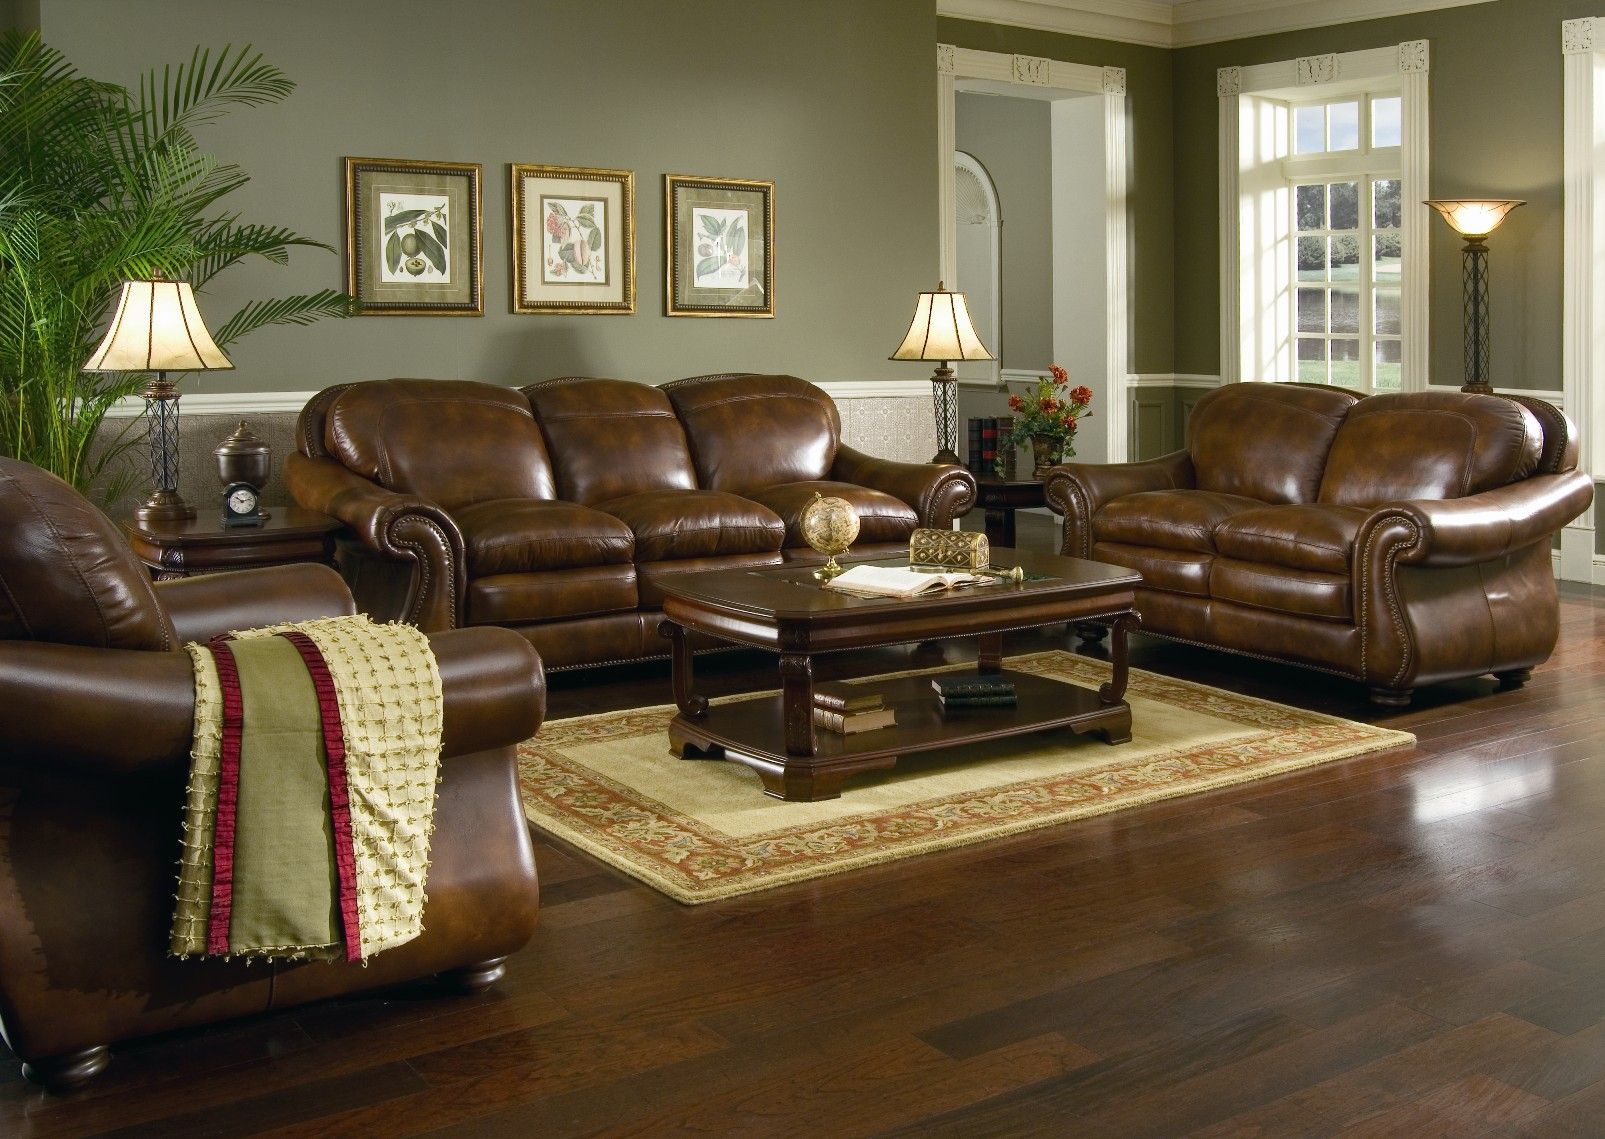 10 Gorgeous Living Rooms With Leather Couches Intended For Sofas For Living Rooms (View 16 of 20)